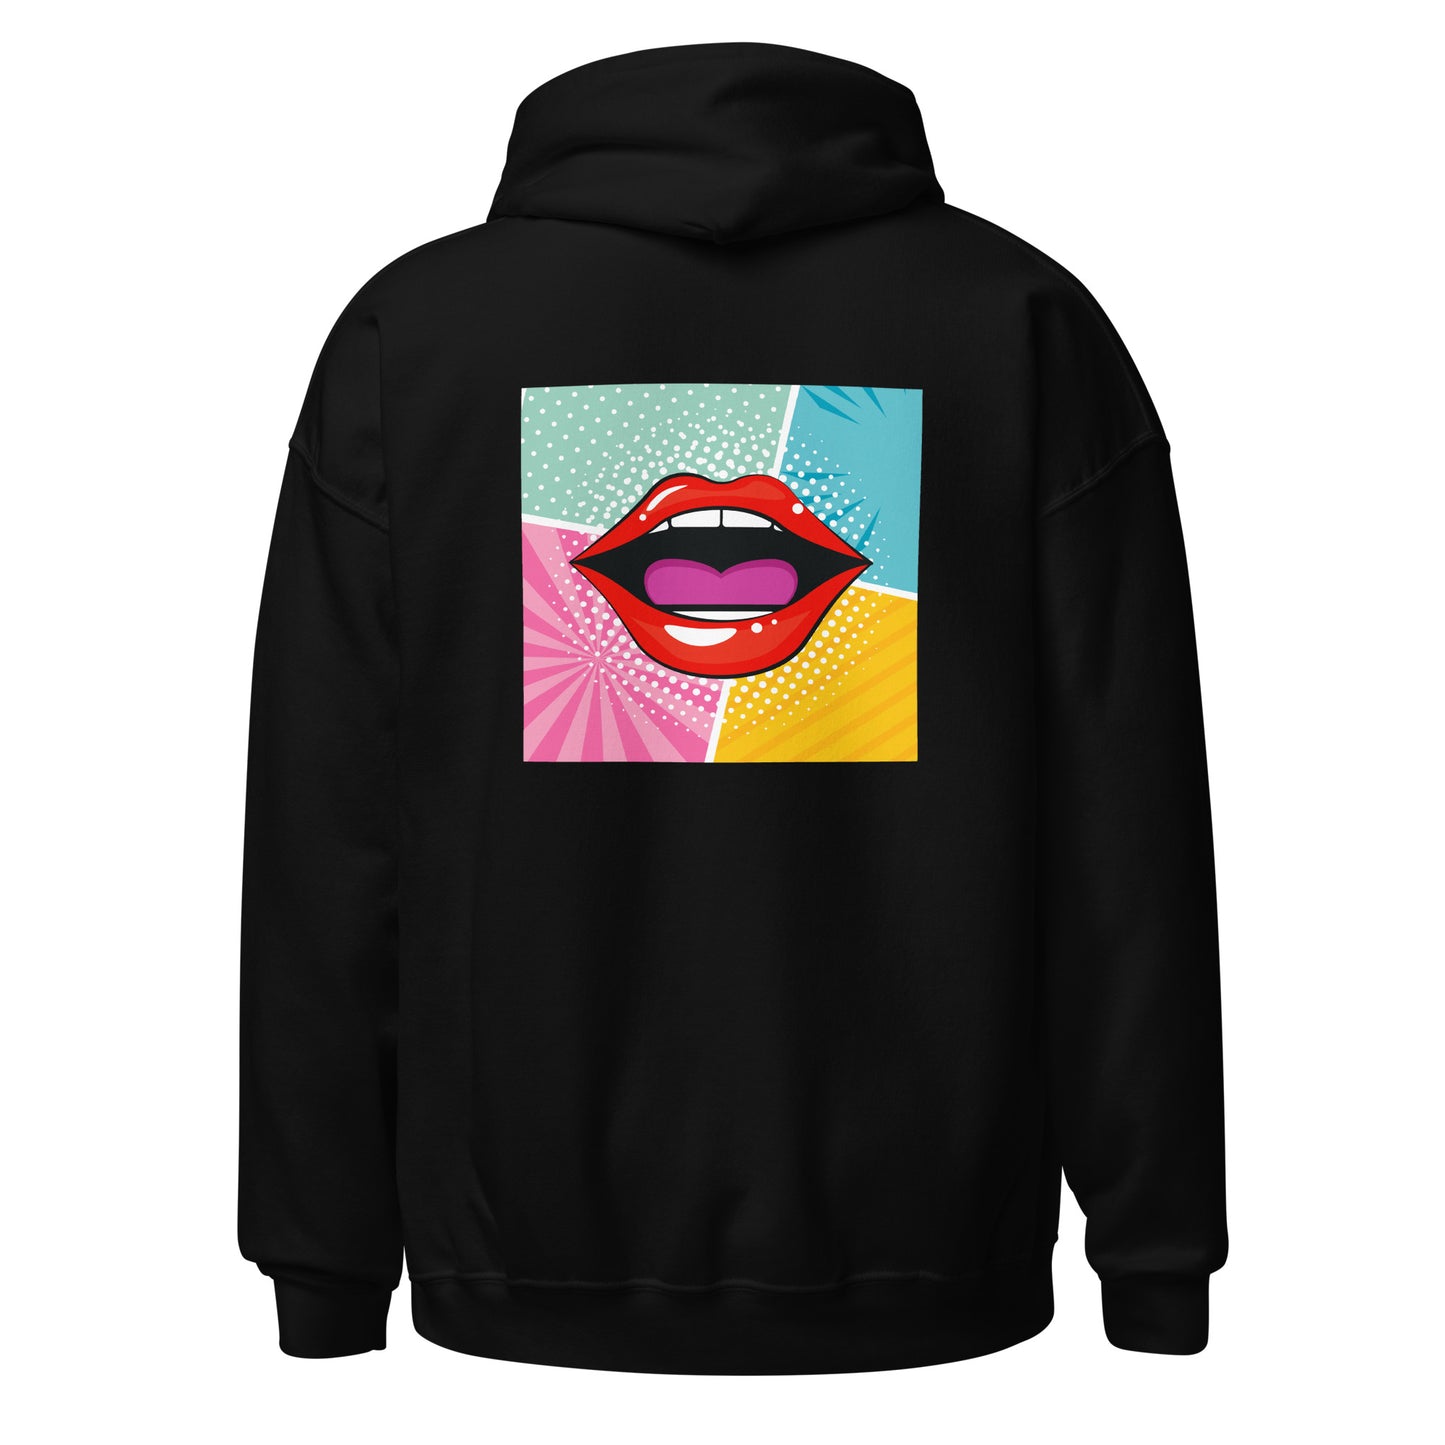 Unisex Hoodie with Mouth/Lips Pop art design (sourced Vecteezy.com)